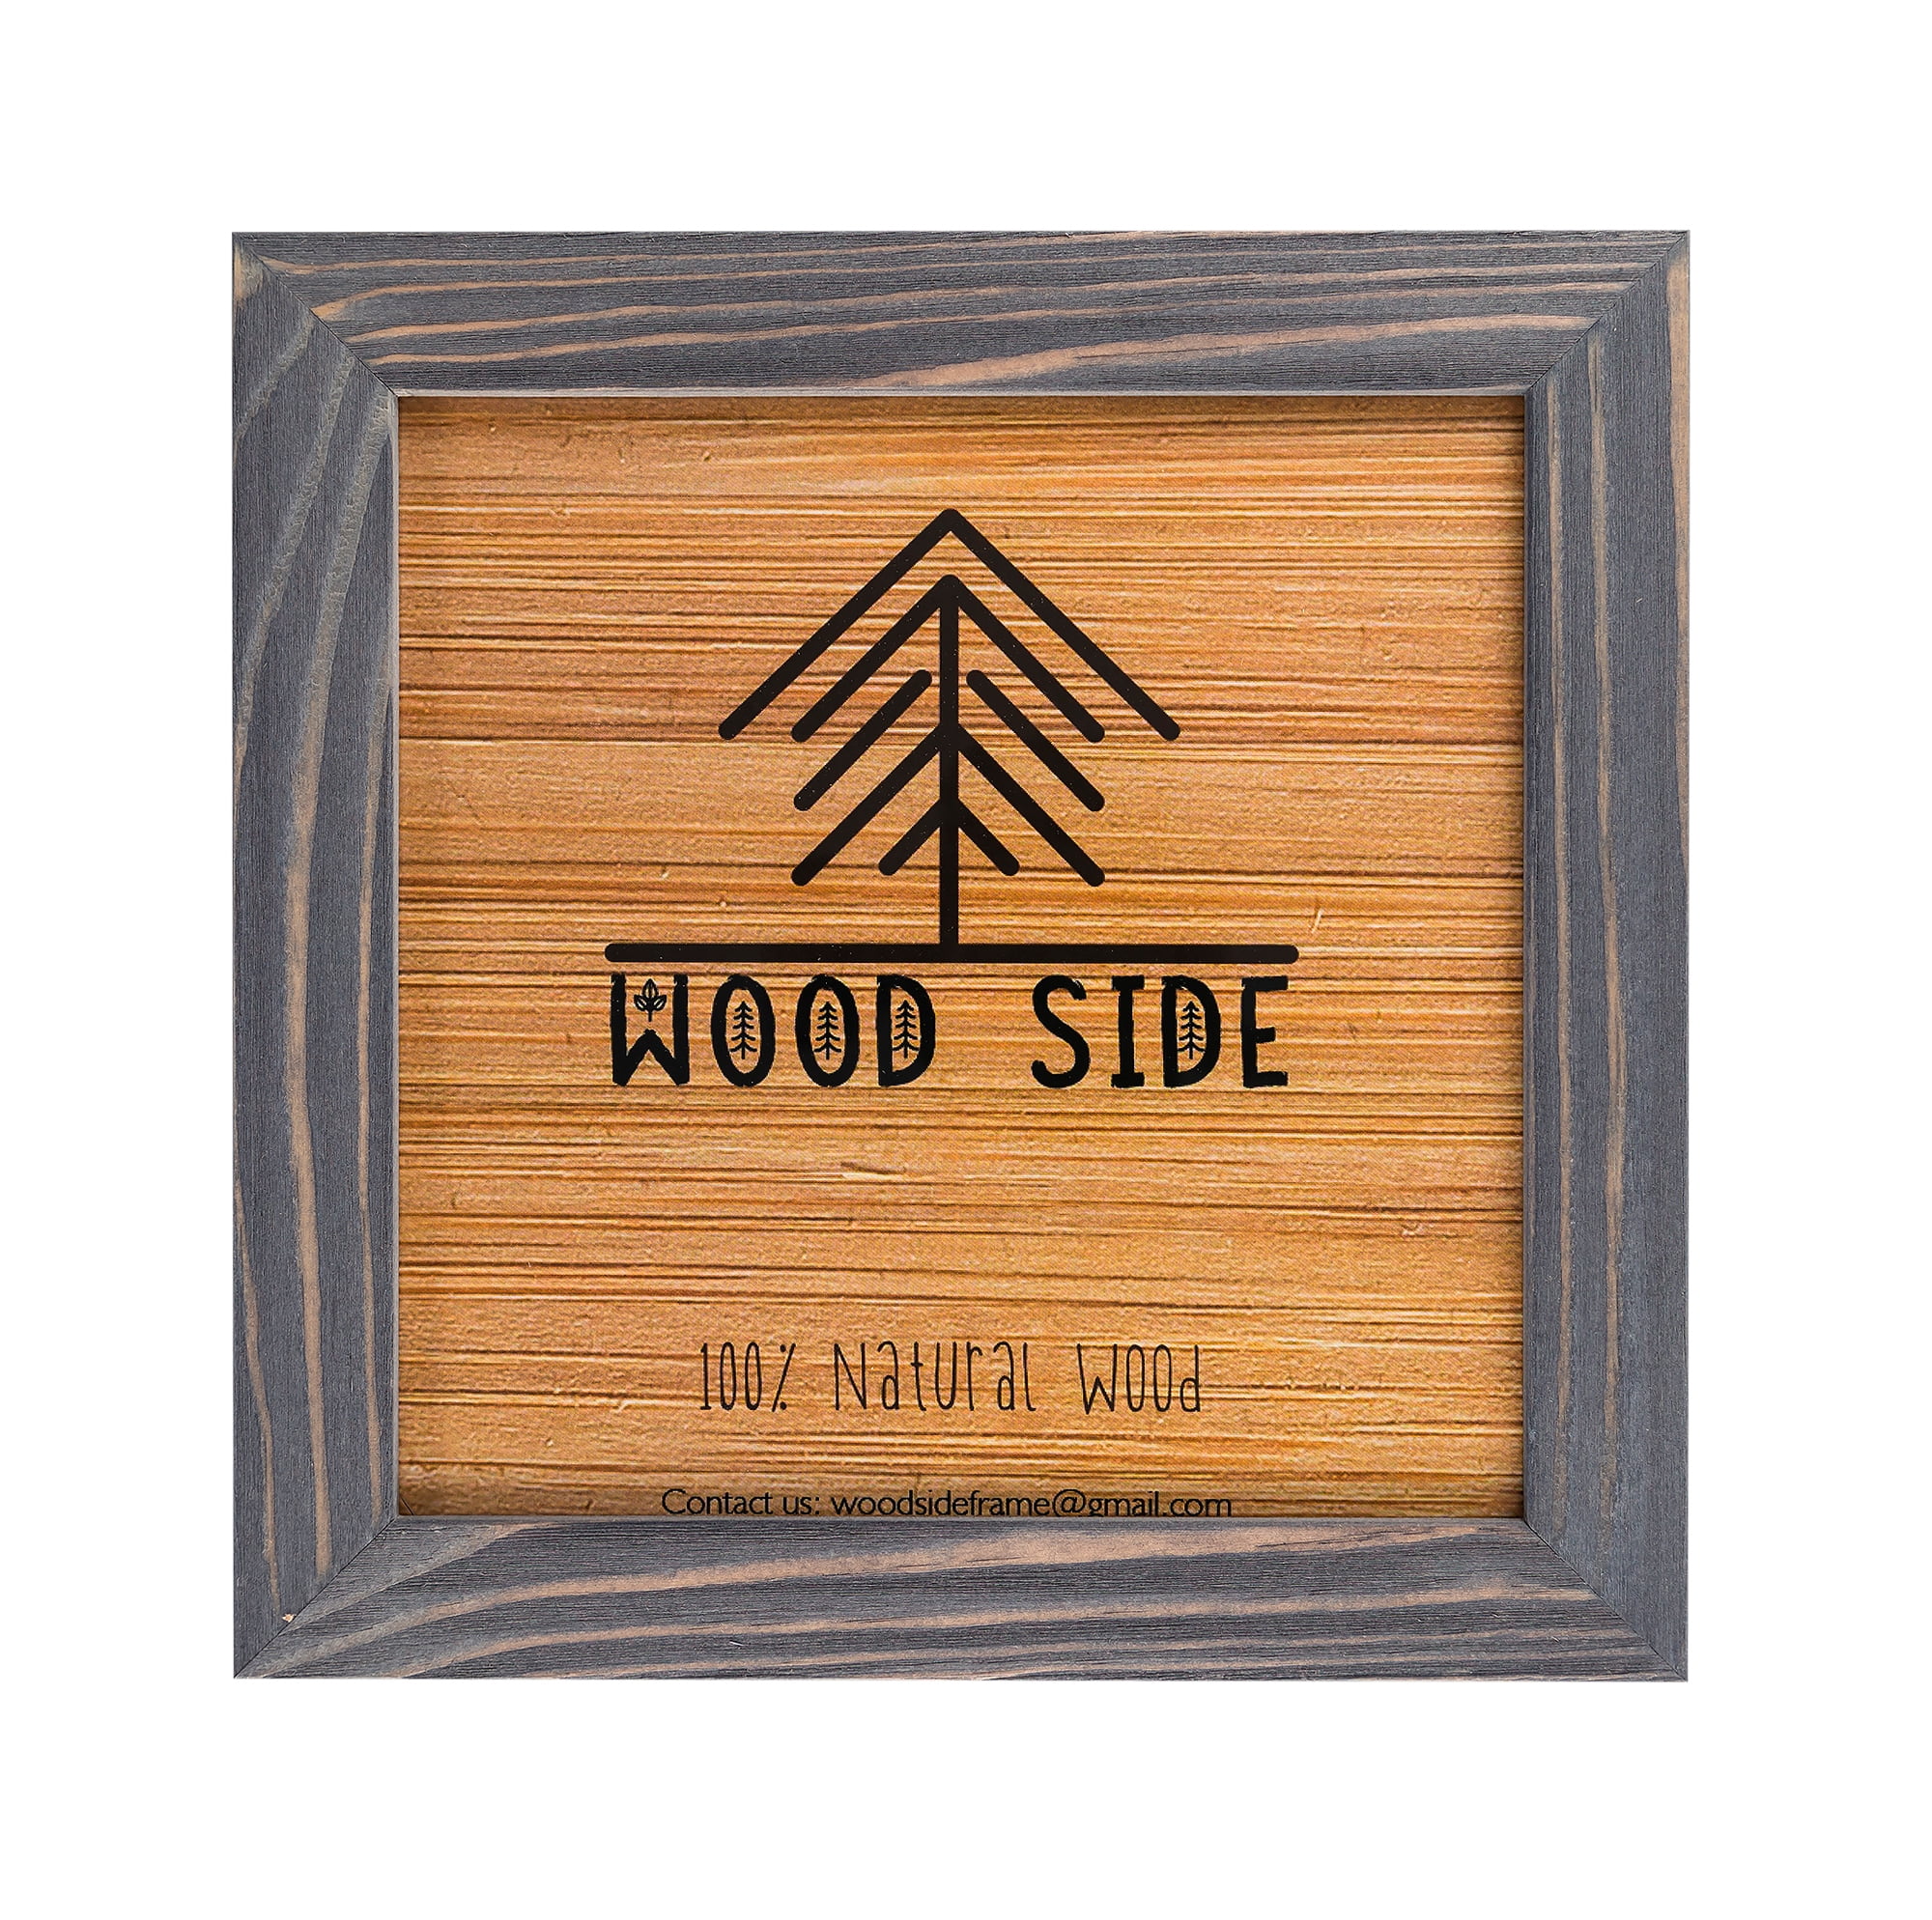 12X12 BARNWOOD PICTURE FRAME 